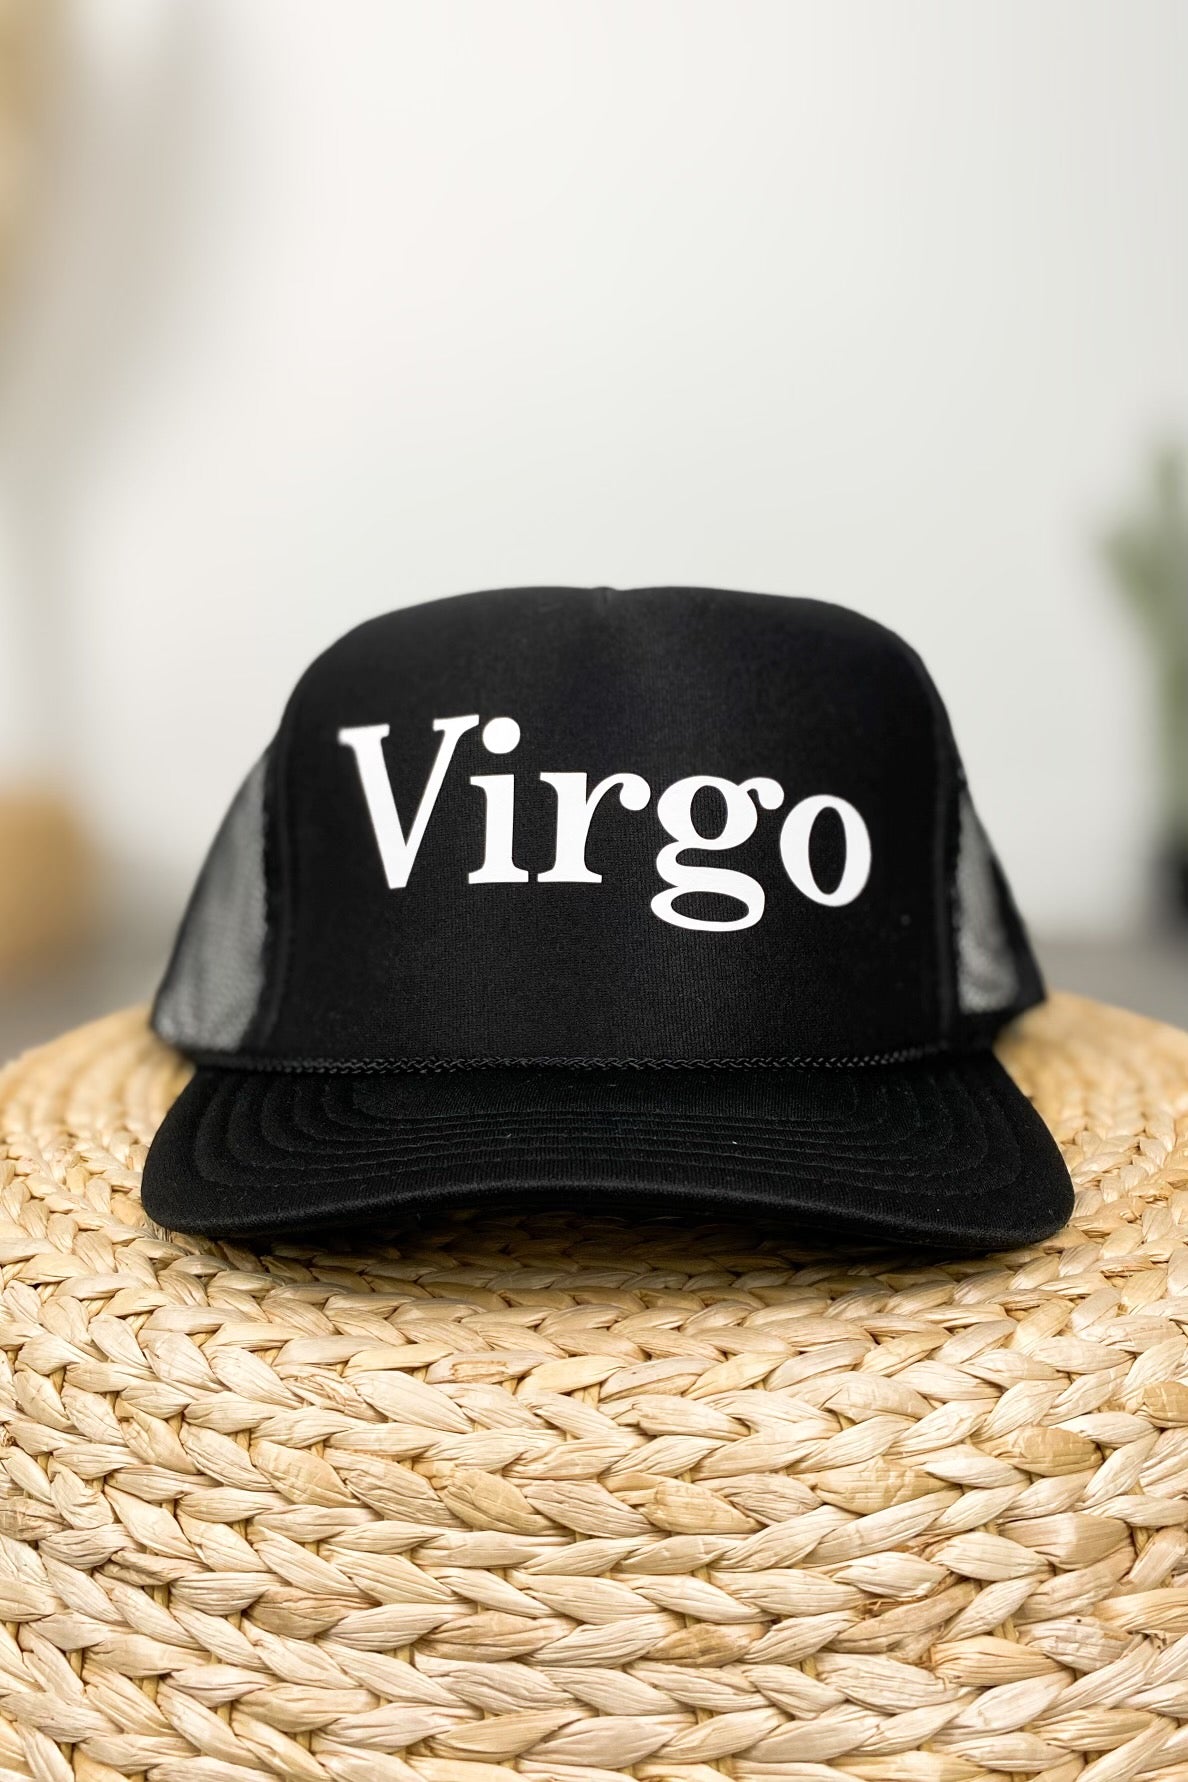 Virgo trucker hat black - Trendy Hats at Lush Fashion Lounge Boutique in Oklahoma City